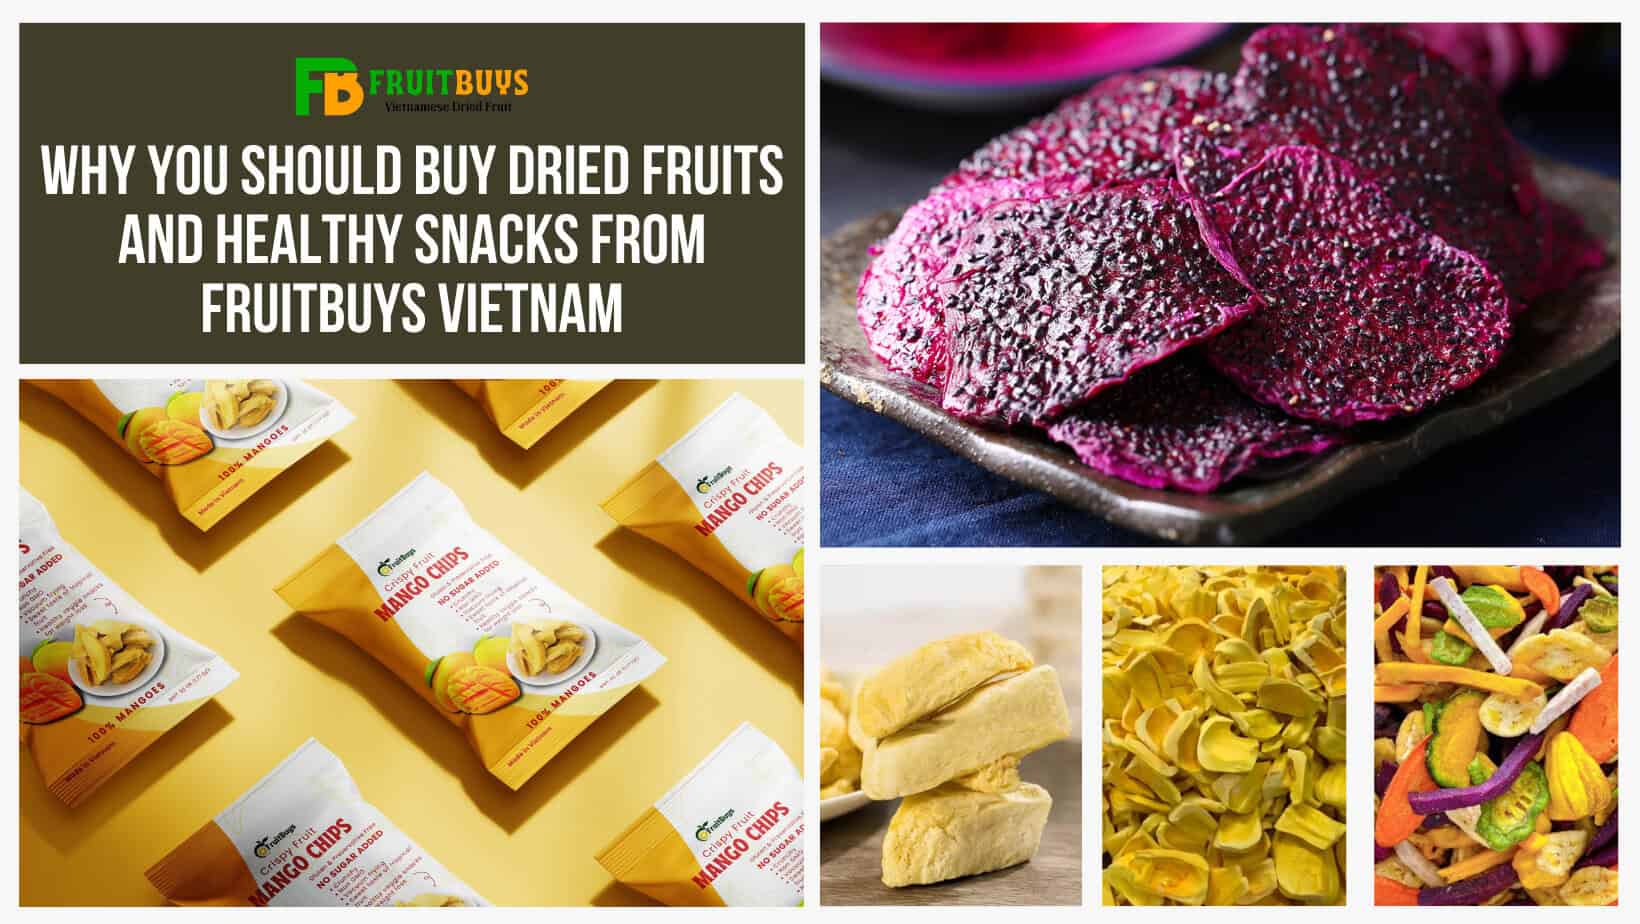 FruitBuys Vietnam Why You Should Buy Dried Fruits And Healthy Snacks From FruitBuys Vietnam (1)